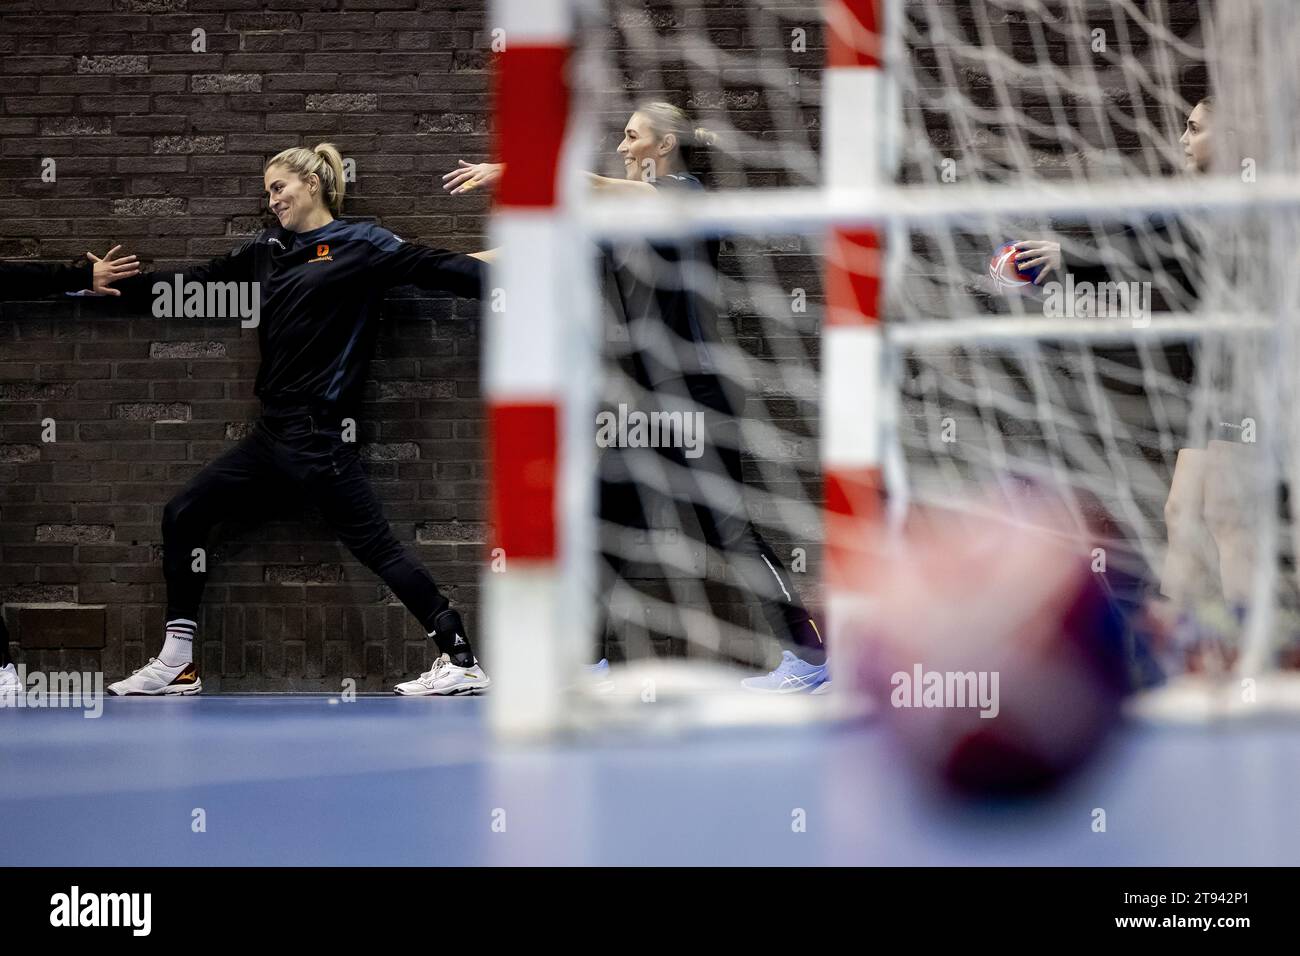 ARNHEM - Estavana Polman and Lois Abbingh during the training of the women's handball team for the World Cup. The World Cup is held in Denmark, Norway and Sweden. ANP ROBIN VAN LONKHUIJSEN netherlands out - belgium out Stock Photo